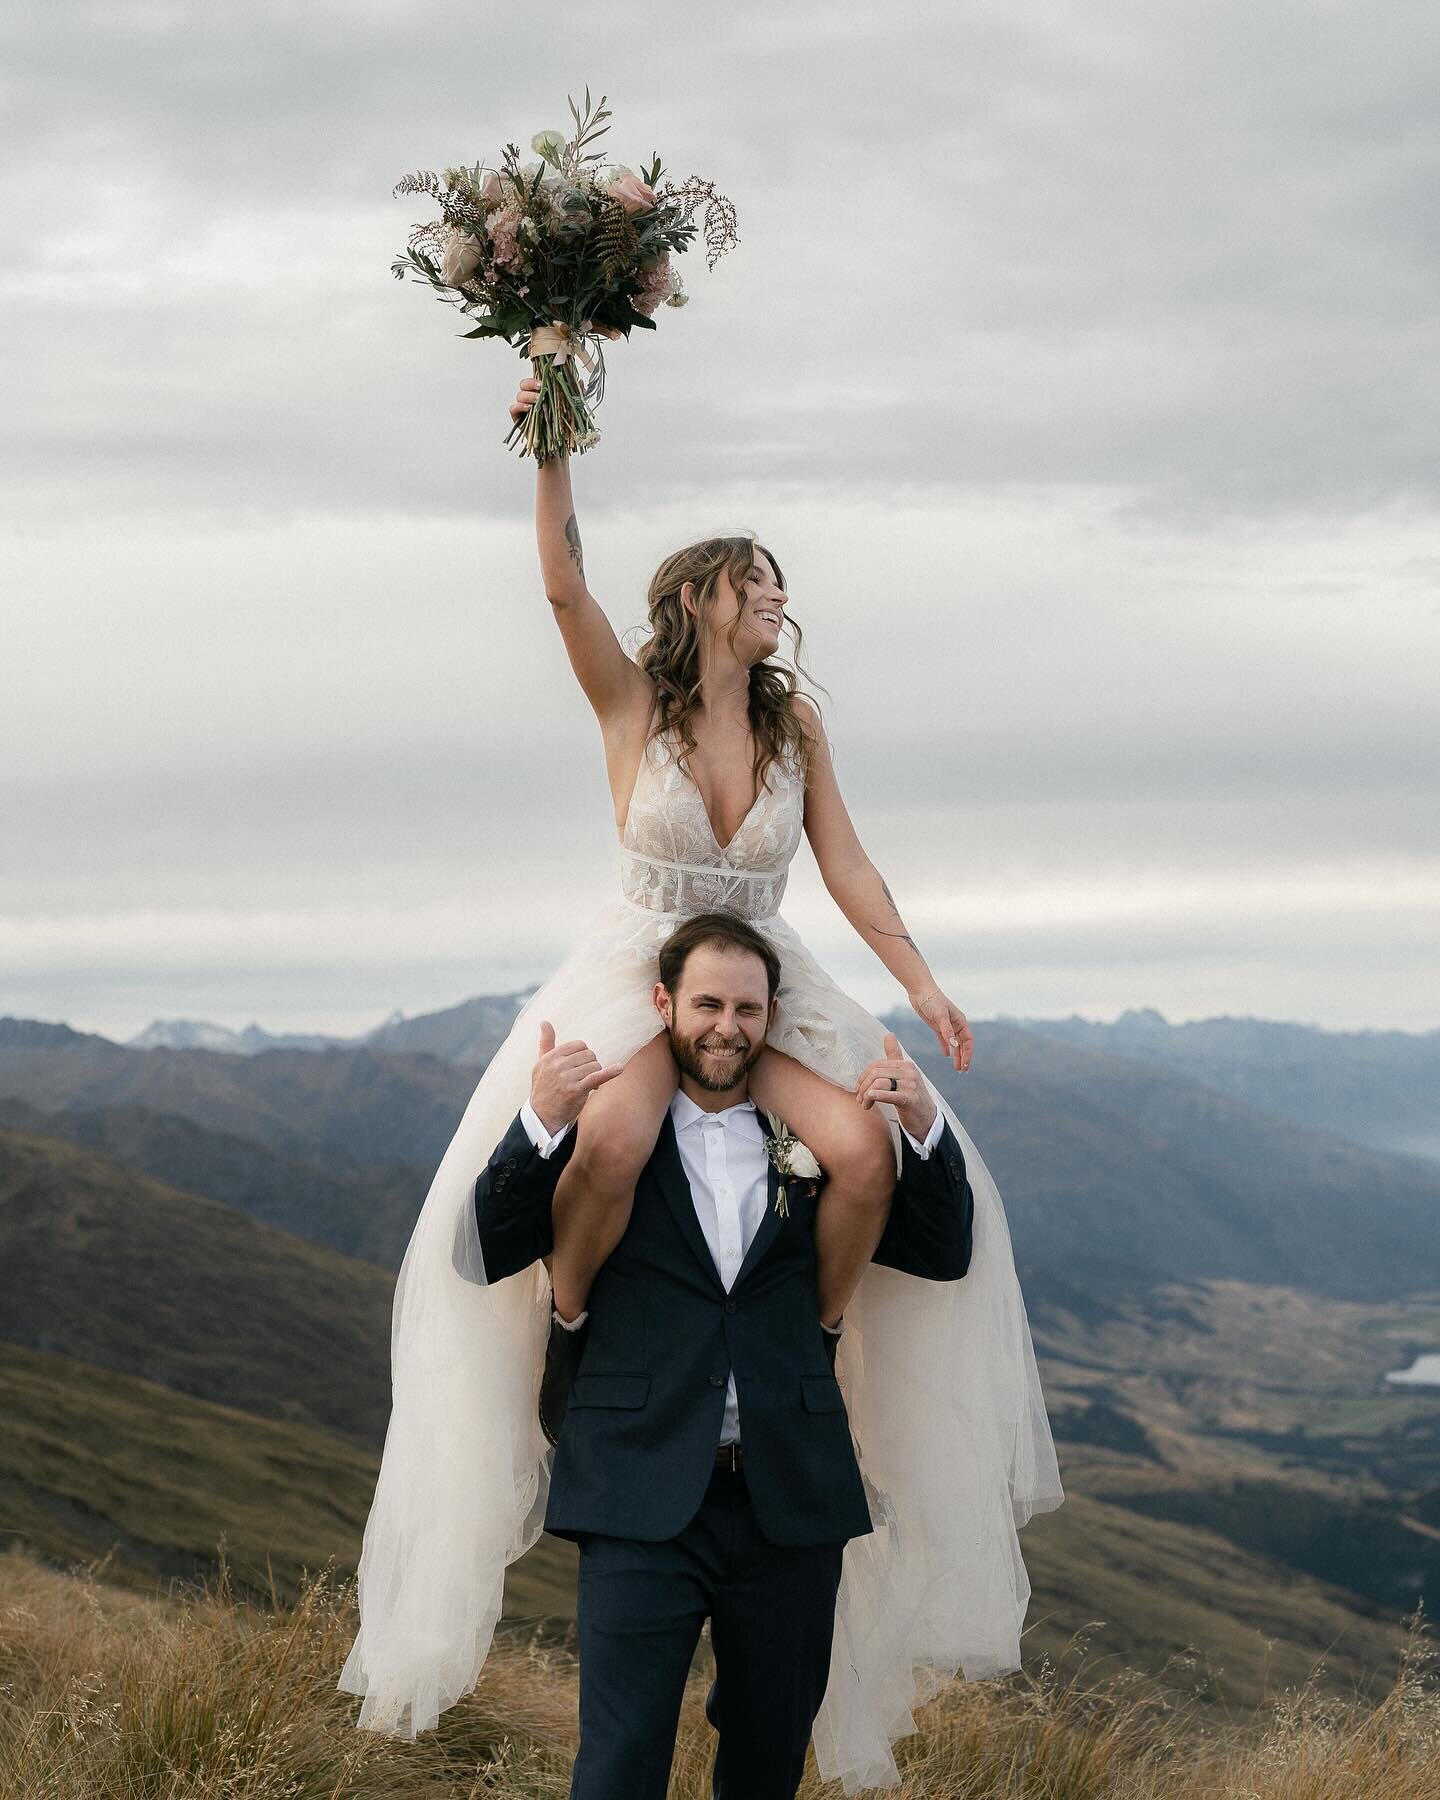 These gorgeous images from Megan &amp; Jason&rsquo;s Twin Peak adventure may be just the little reminder you need as to why you&rsquo;d consider eloping&hellip;

Literally from the moment we met at the Alpine Heli hangar, through to waving our goodby